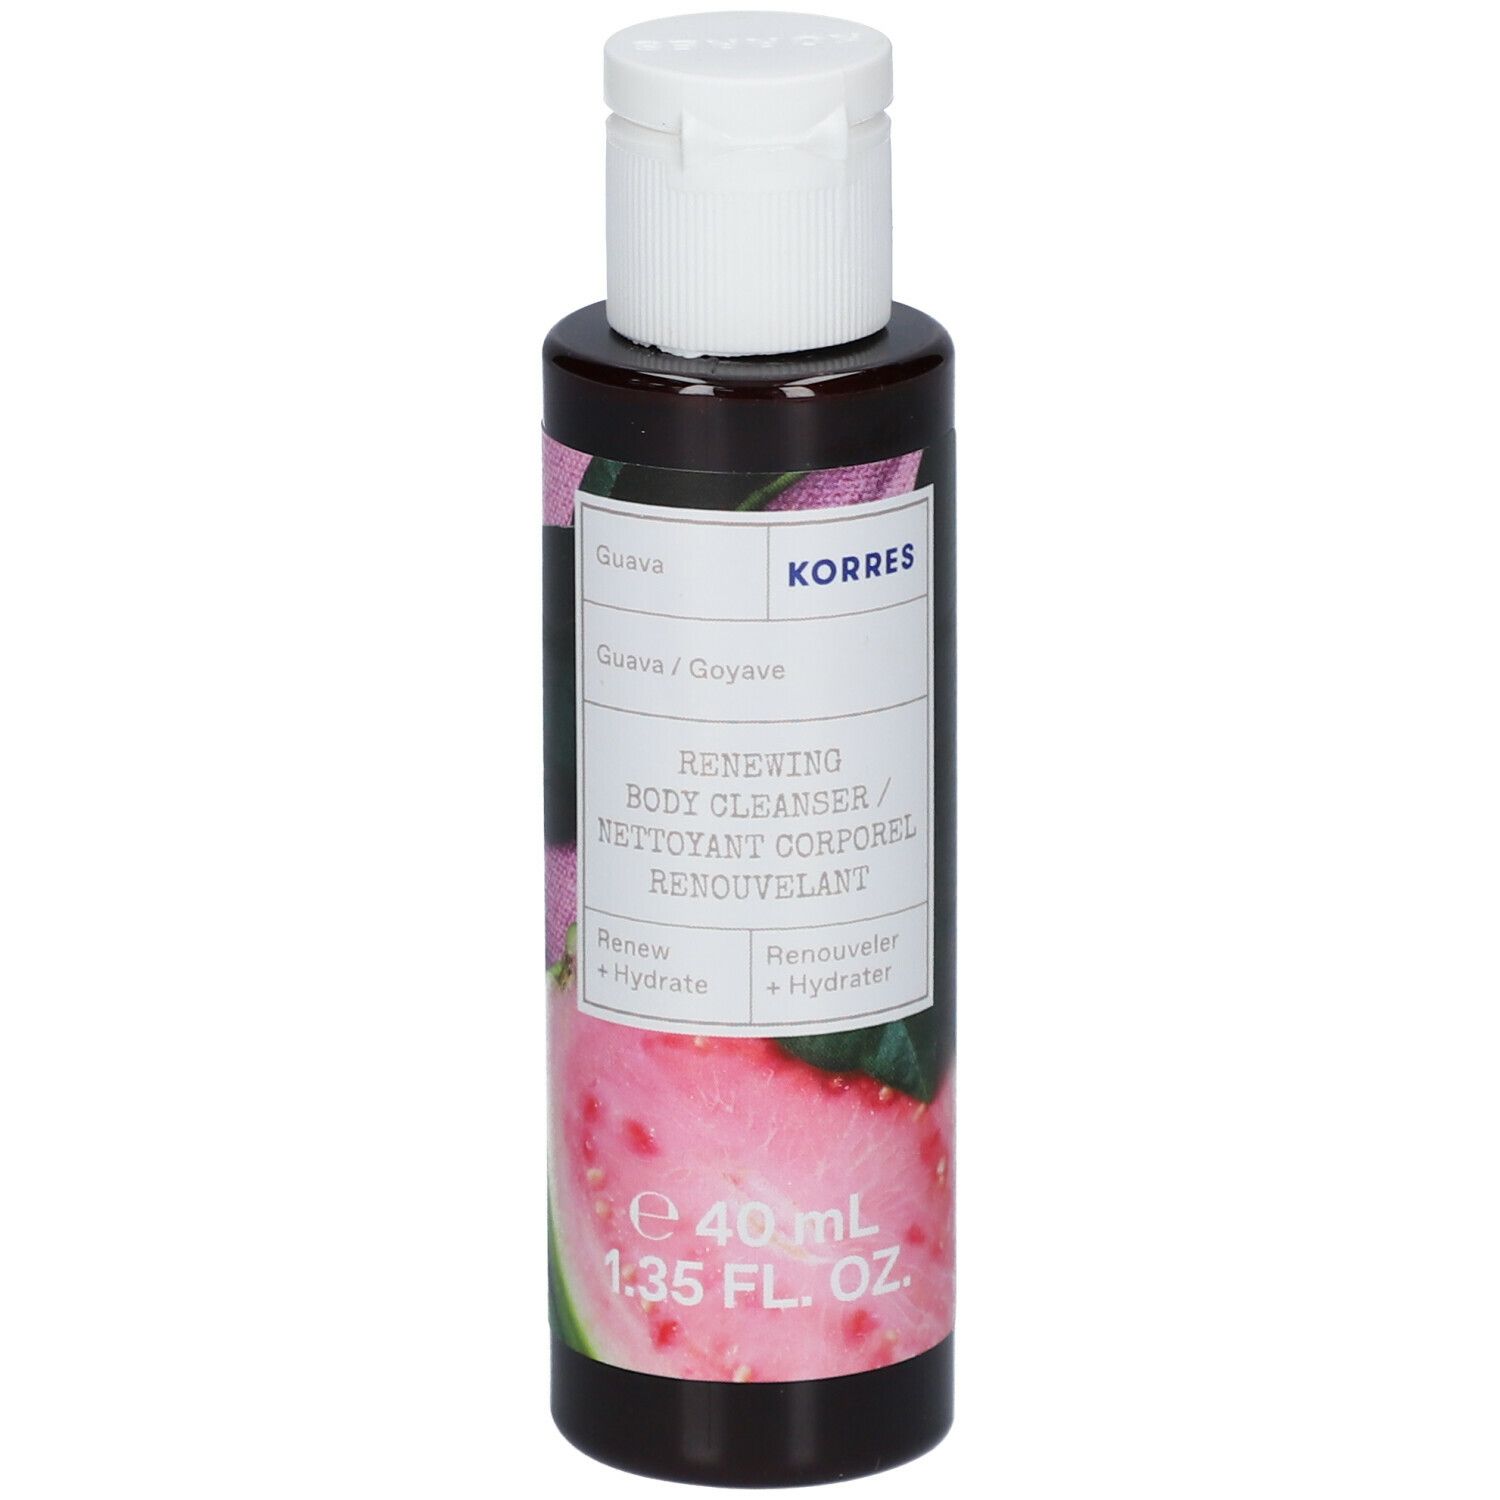 Korres Guava Renewing Body Cleanser